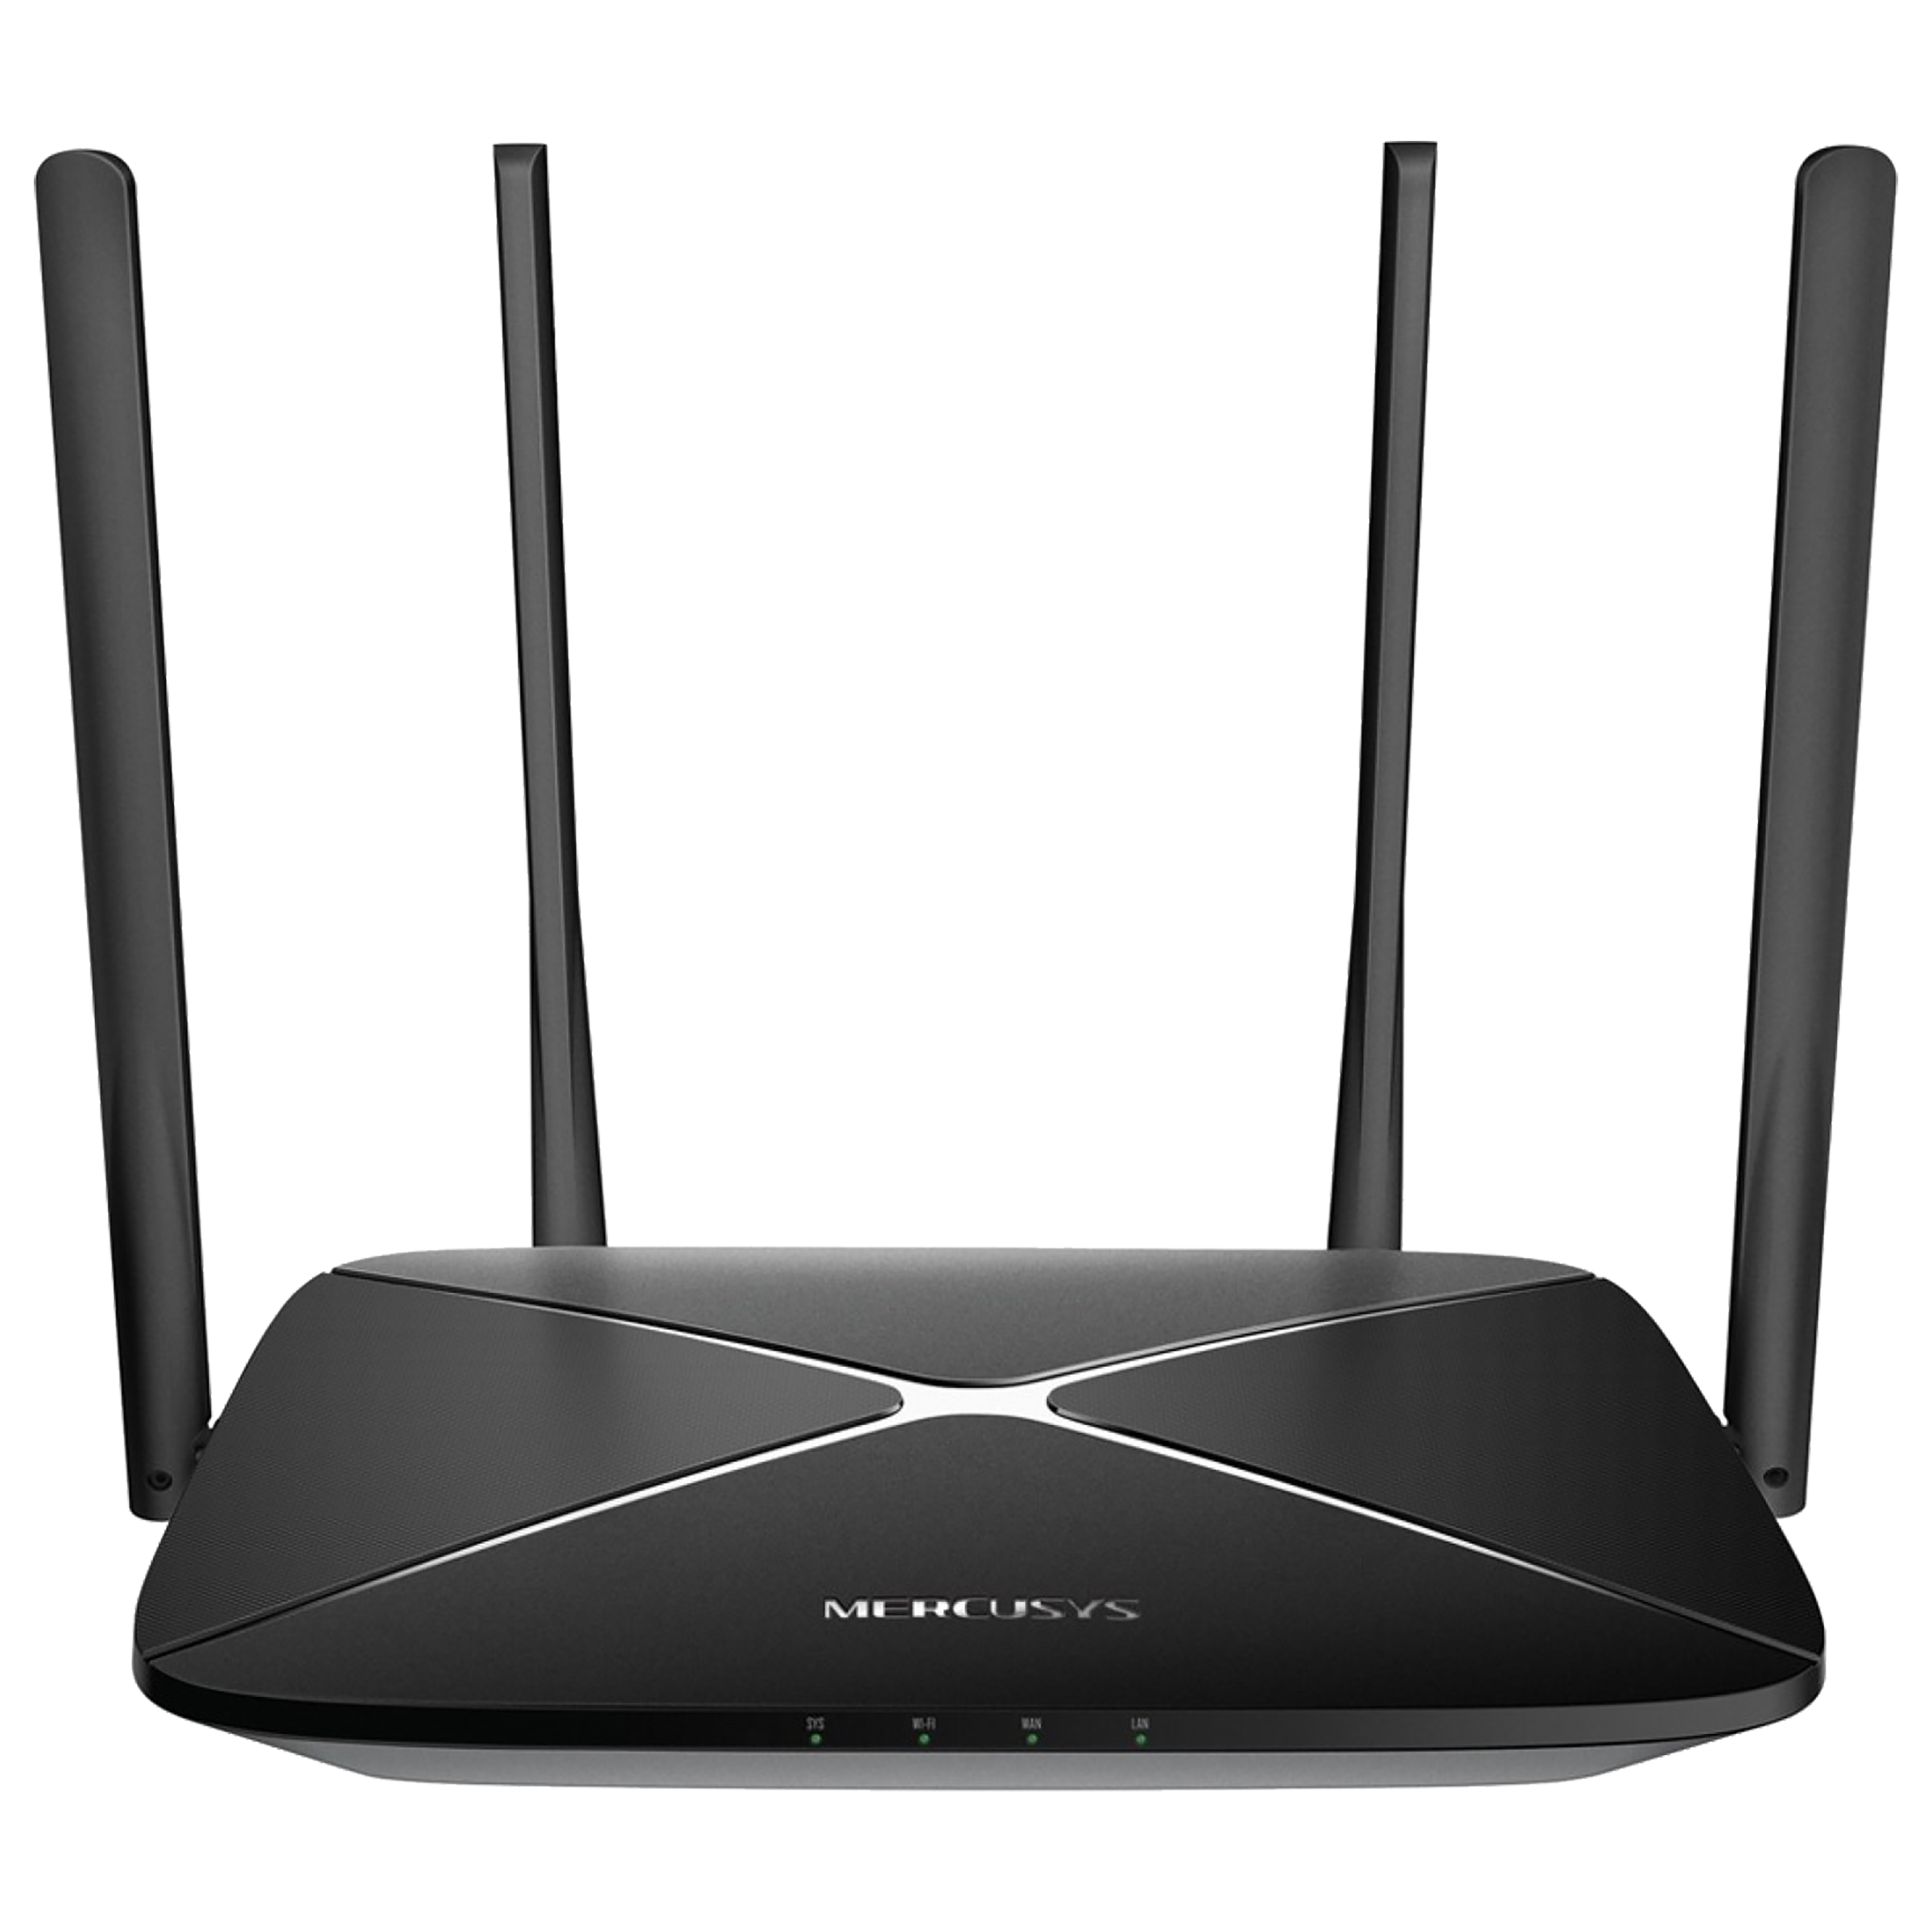 necessary financial cap Buy MERCUSYS AC Dual Band 300 Mbps at 2.4 GHz, 867 Mbps at 5 GHz WiFi Router  (4 Antennas, 4 LAN Ports, Full Gigabit Ports, 12G, Black) Online - Croma